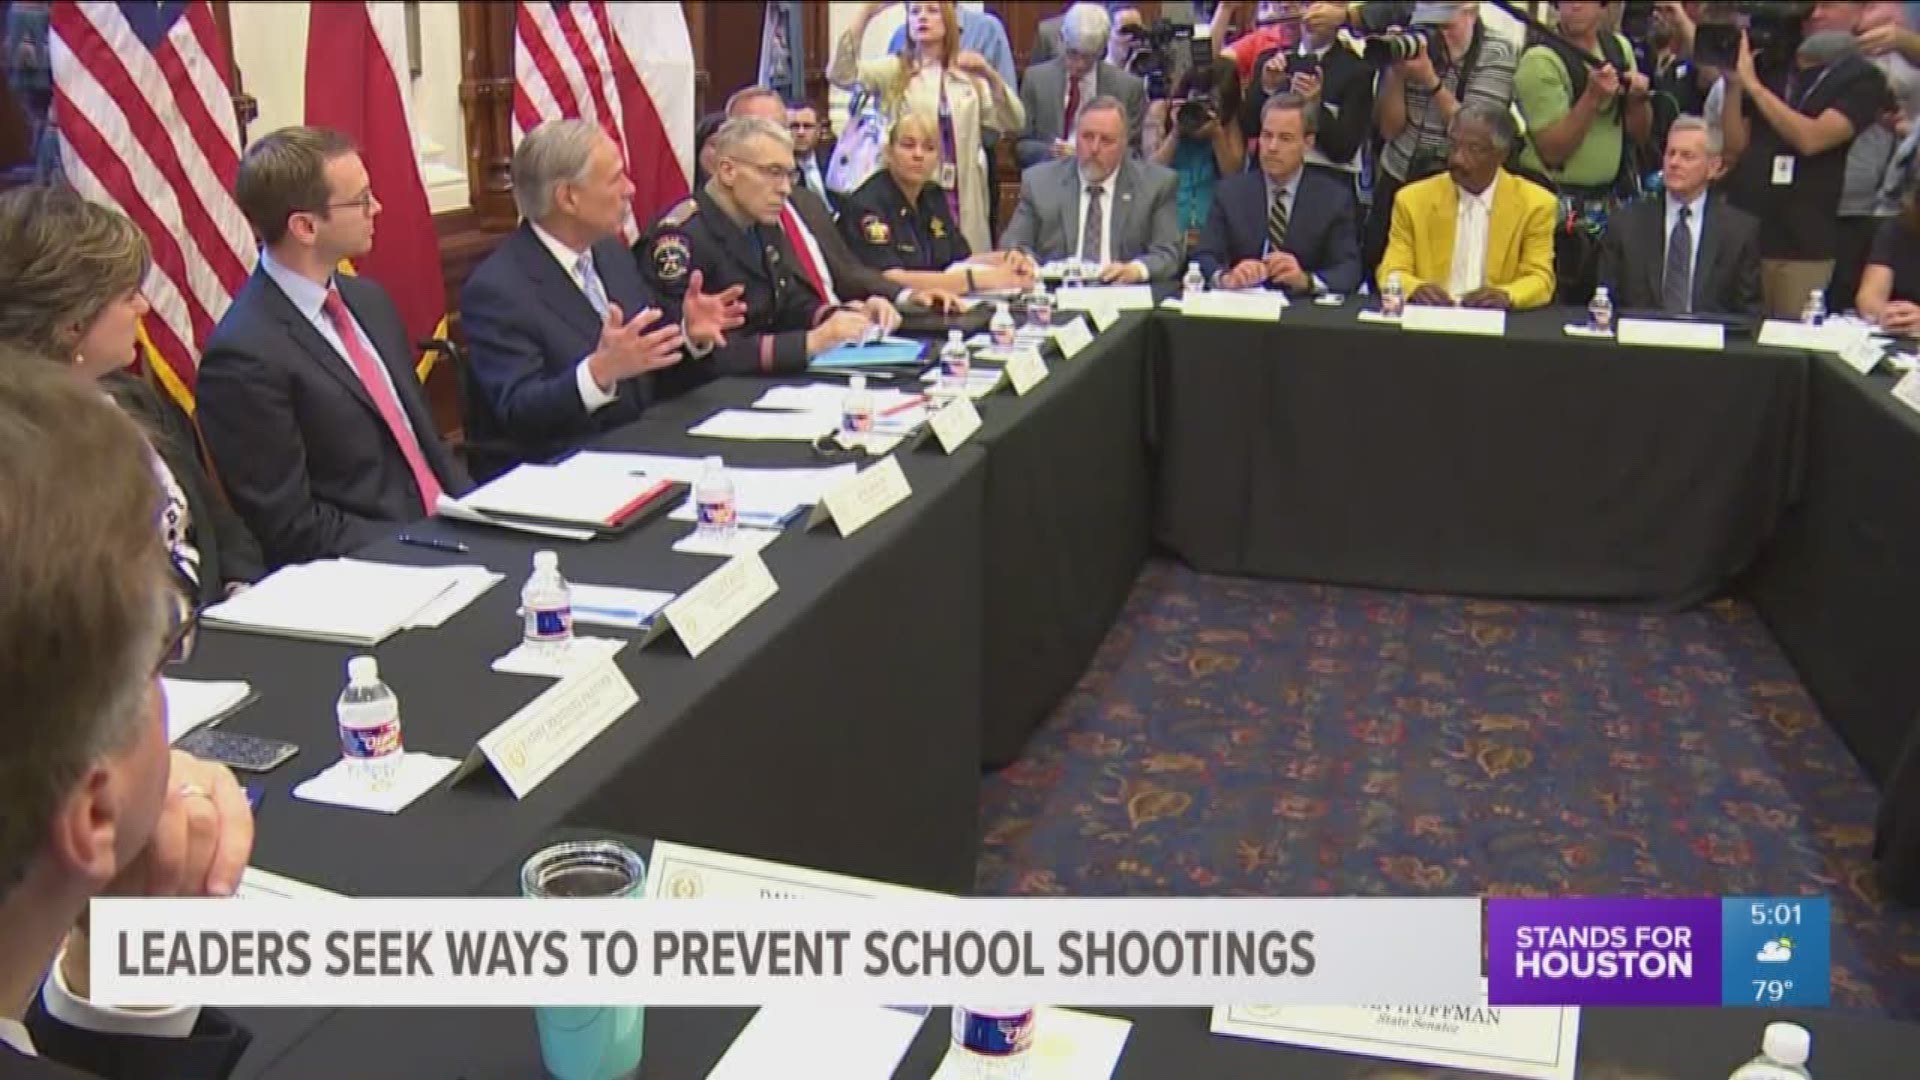 Gov. Greg Abbott led a roundtable discussion among leaders regarding school safety following the mass shooting at Santa Fe High School.